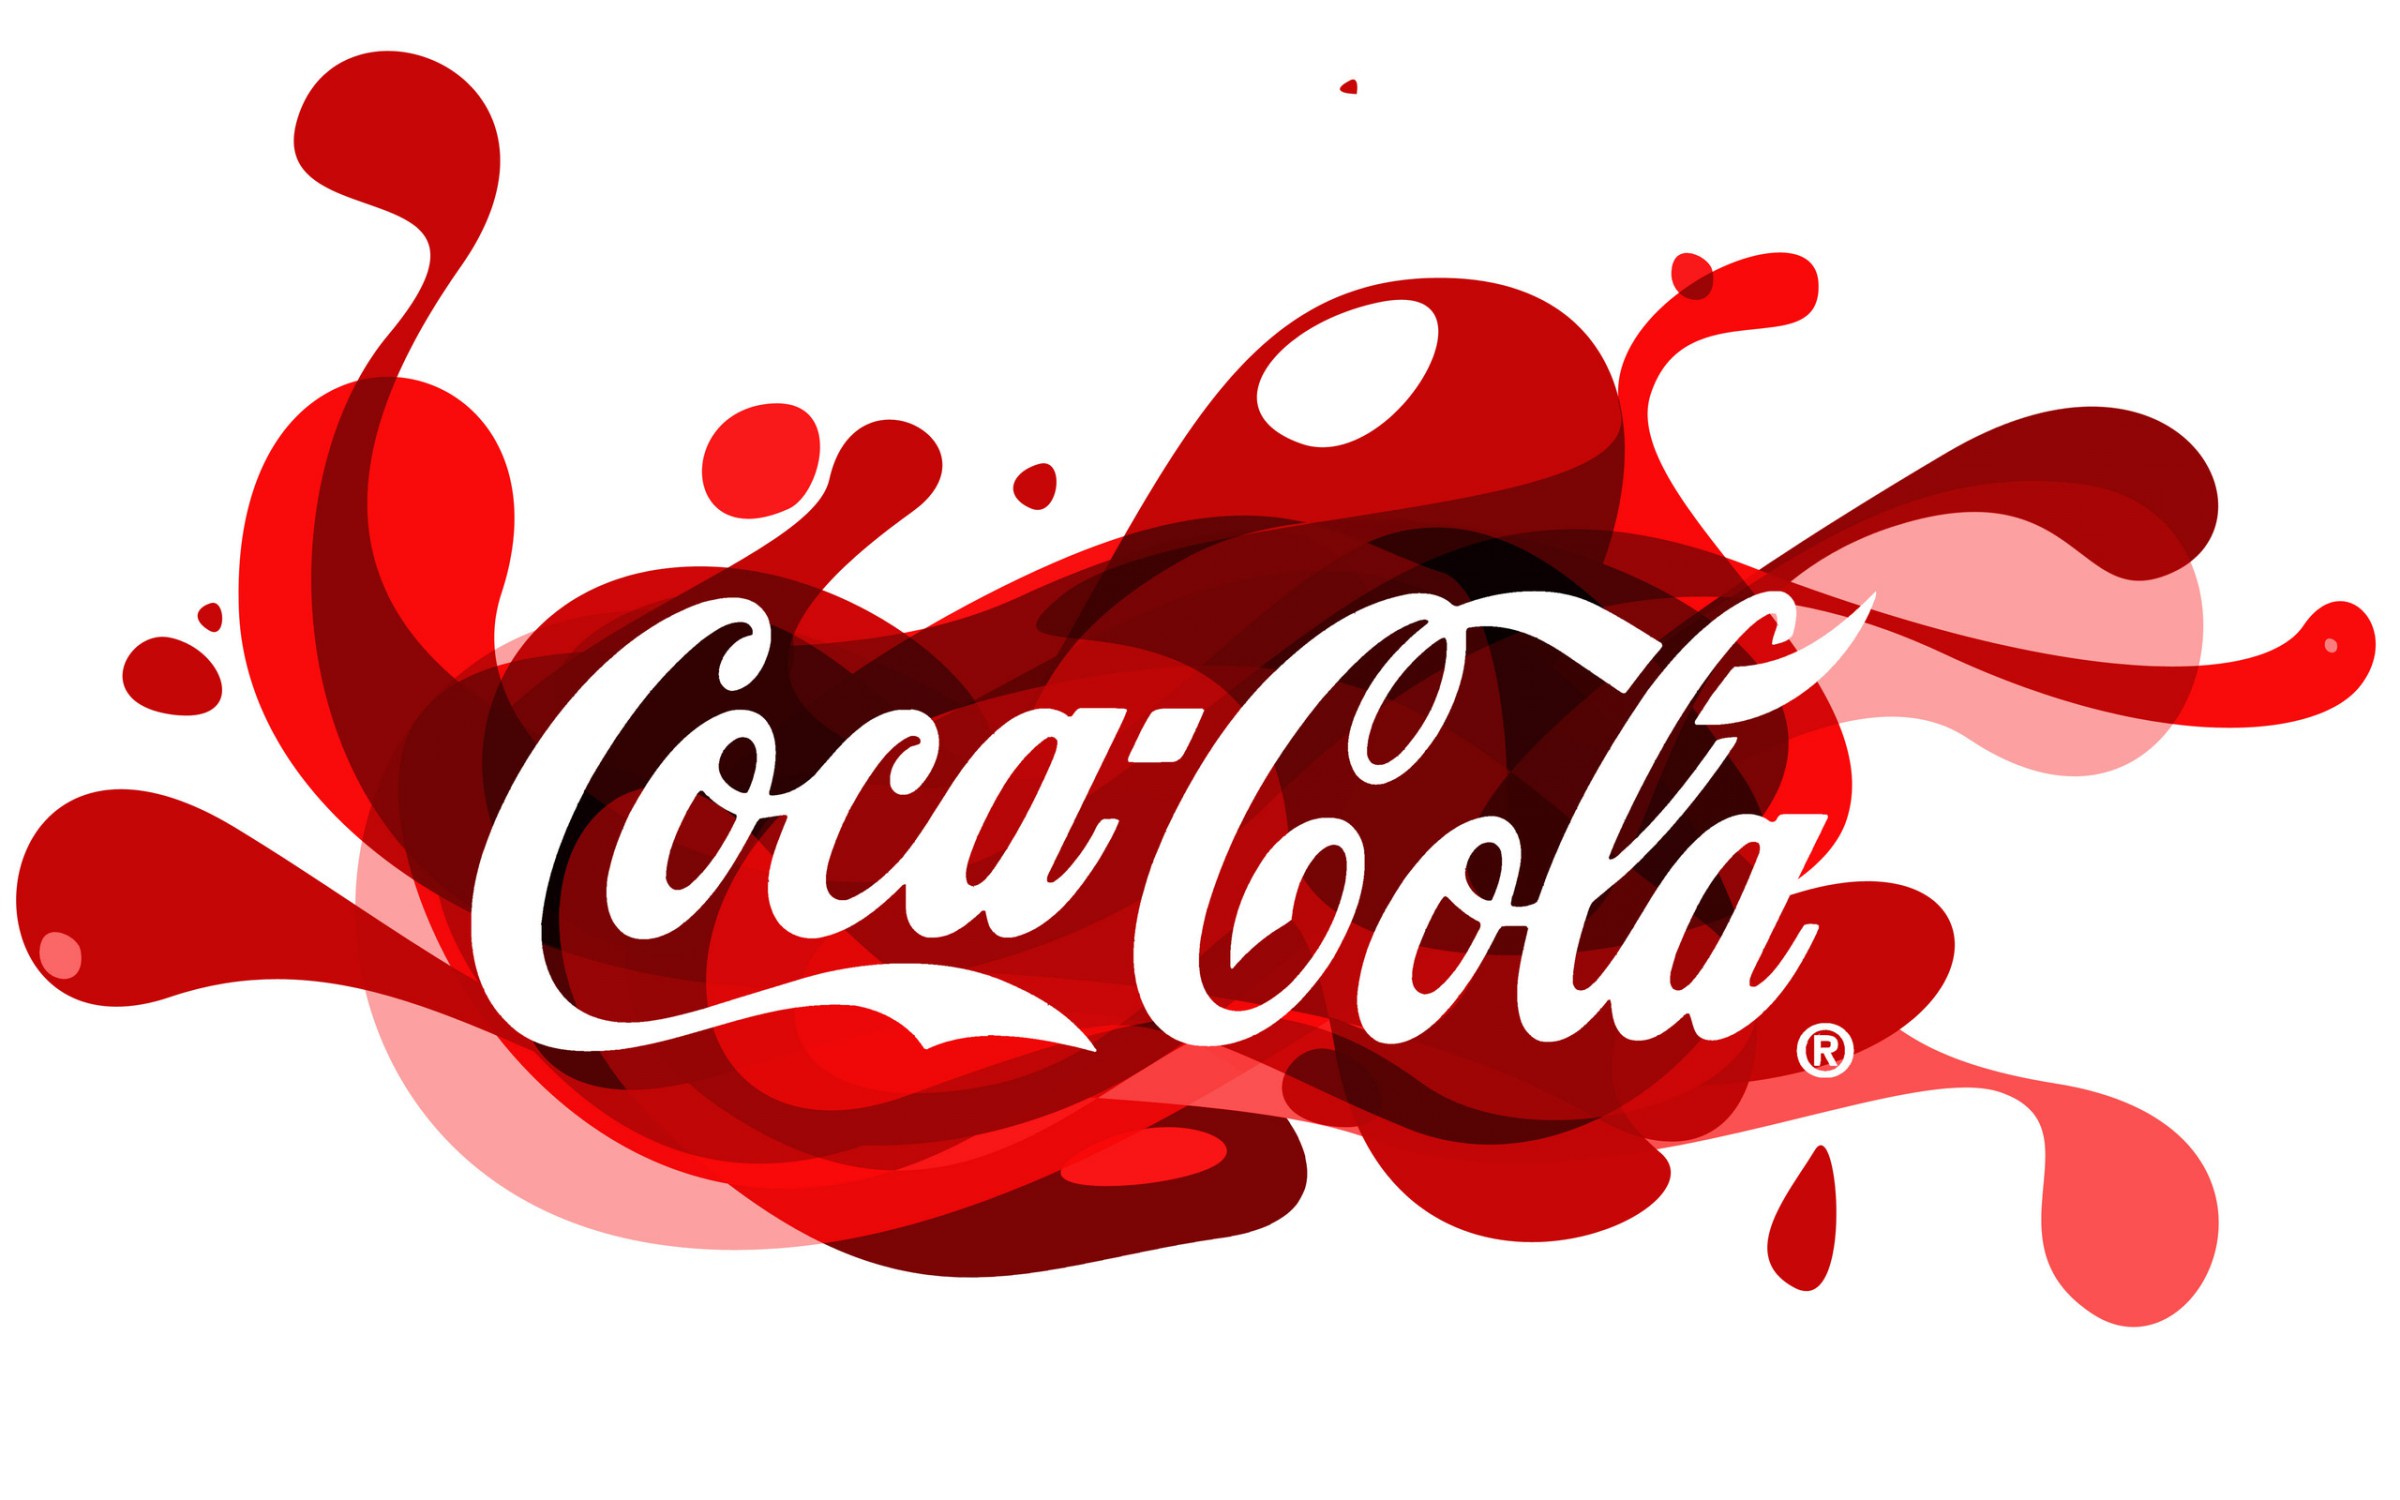 coca cola logo free awesome image for mobile